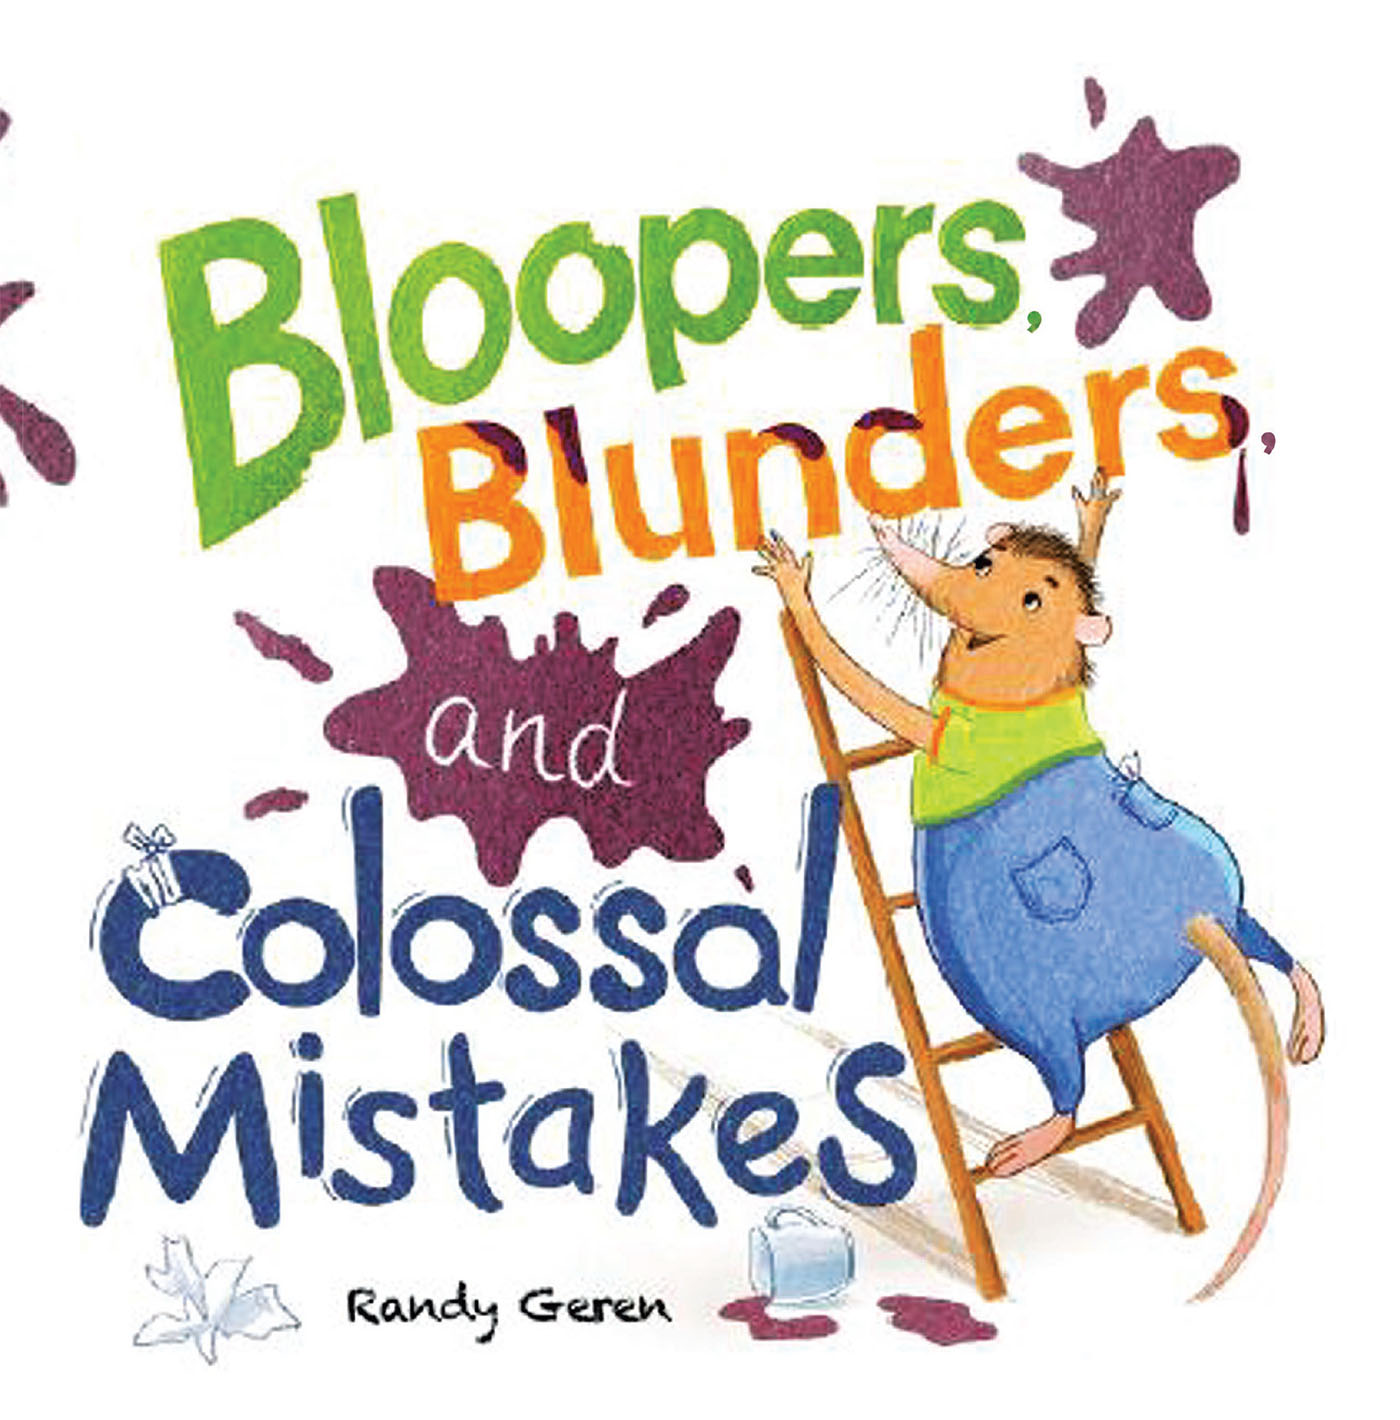 Randy Geren’s New Book, "Bloopers, Blunders, and Colossal Mistakes," is a Delightful Children’s Book That Follows a Young Solenodon Through Various Mistakes and Errors